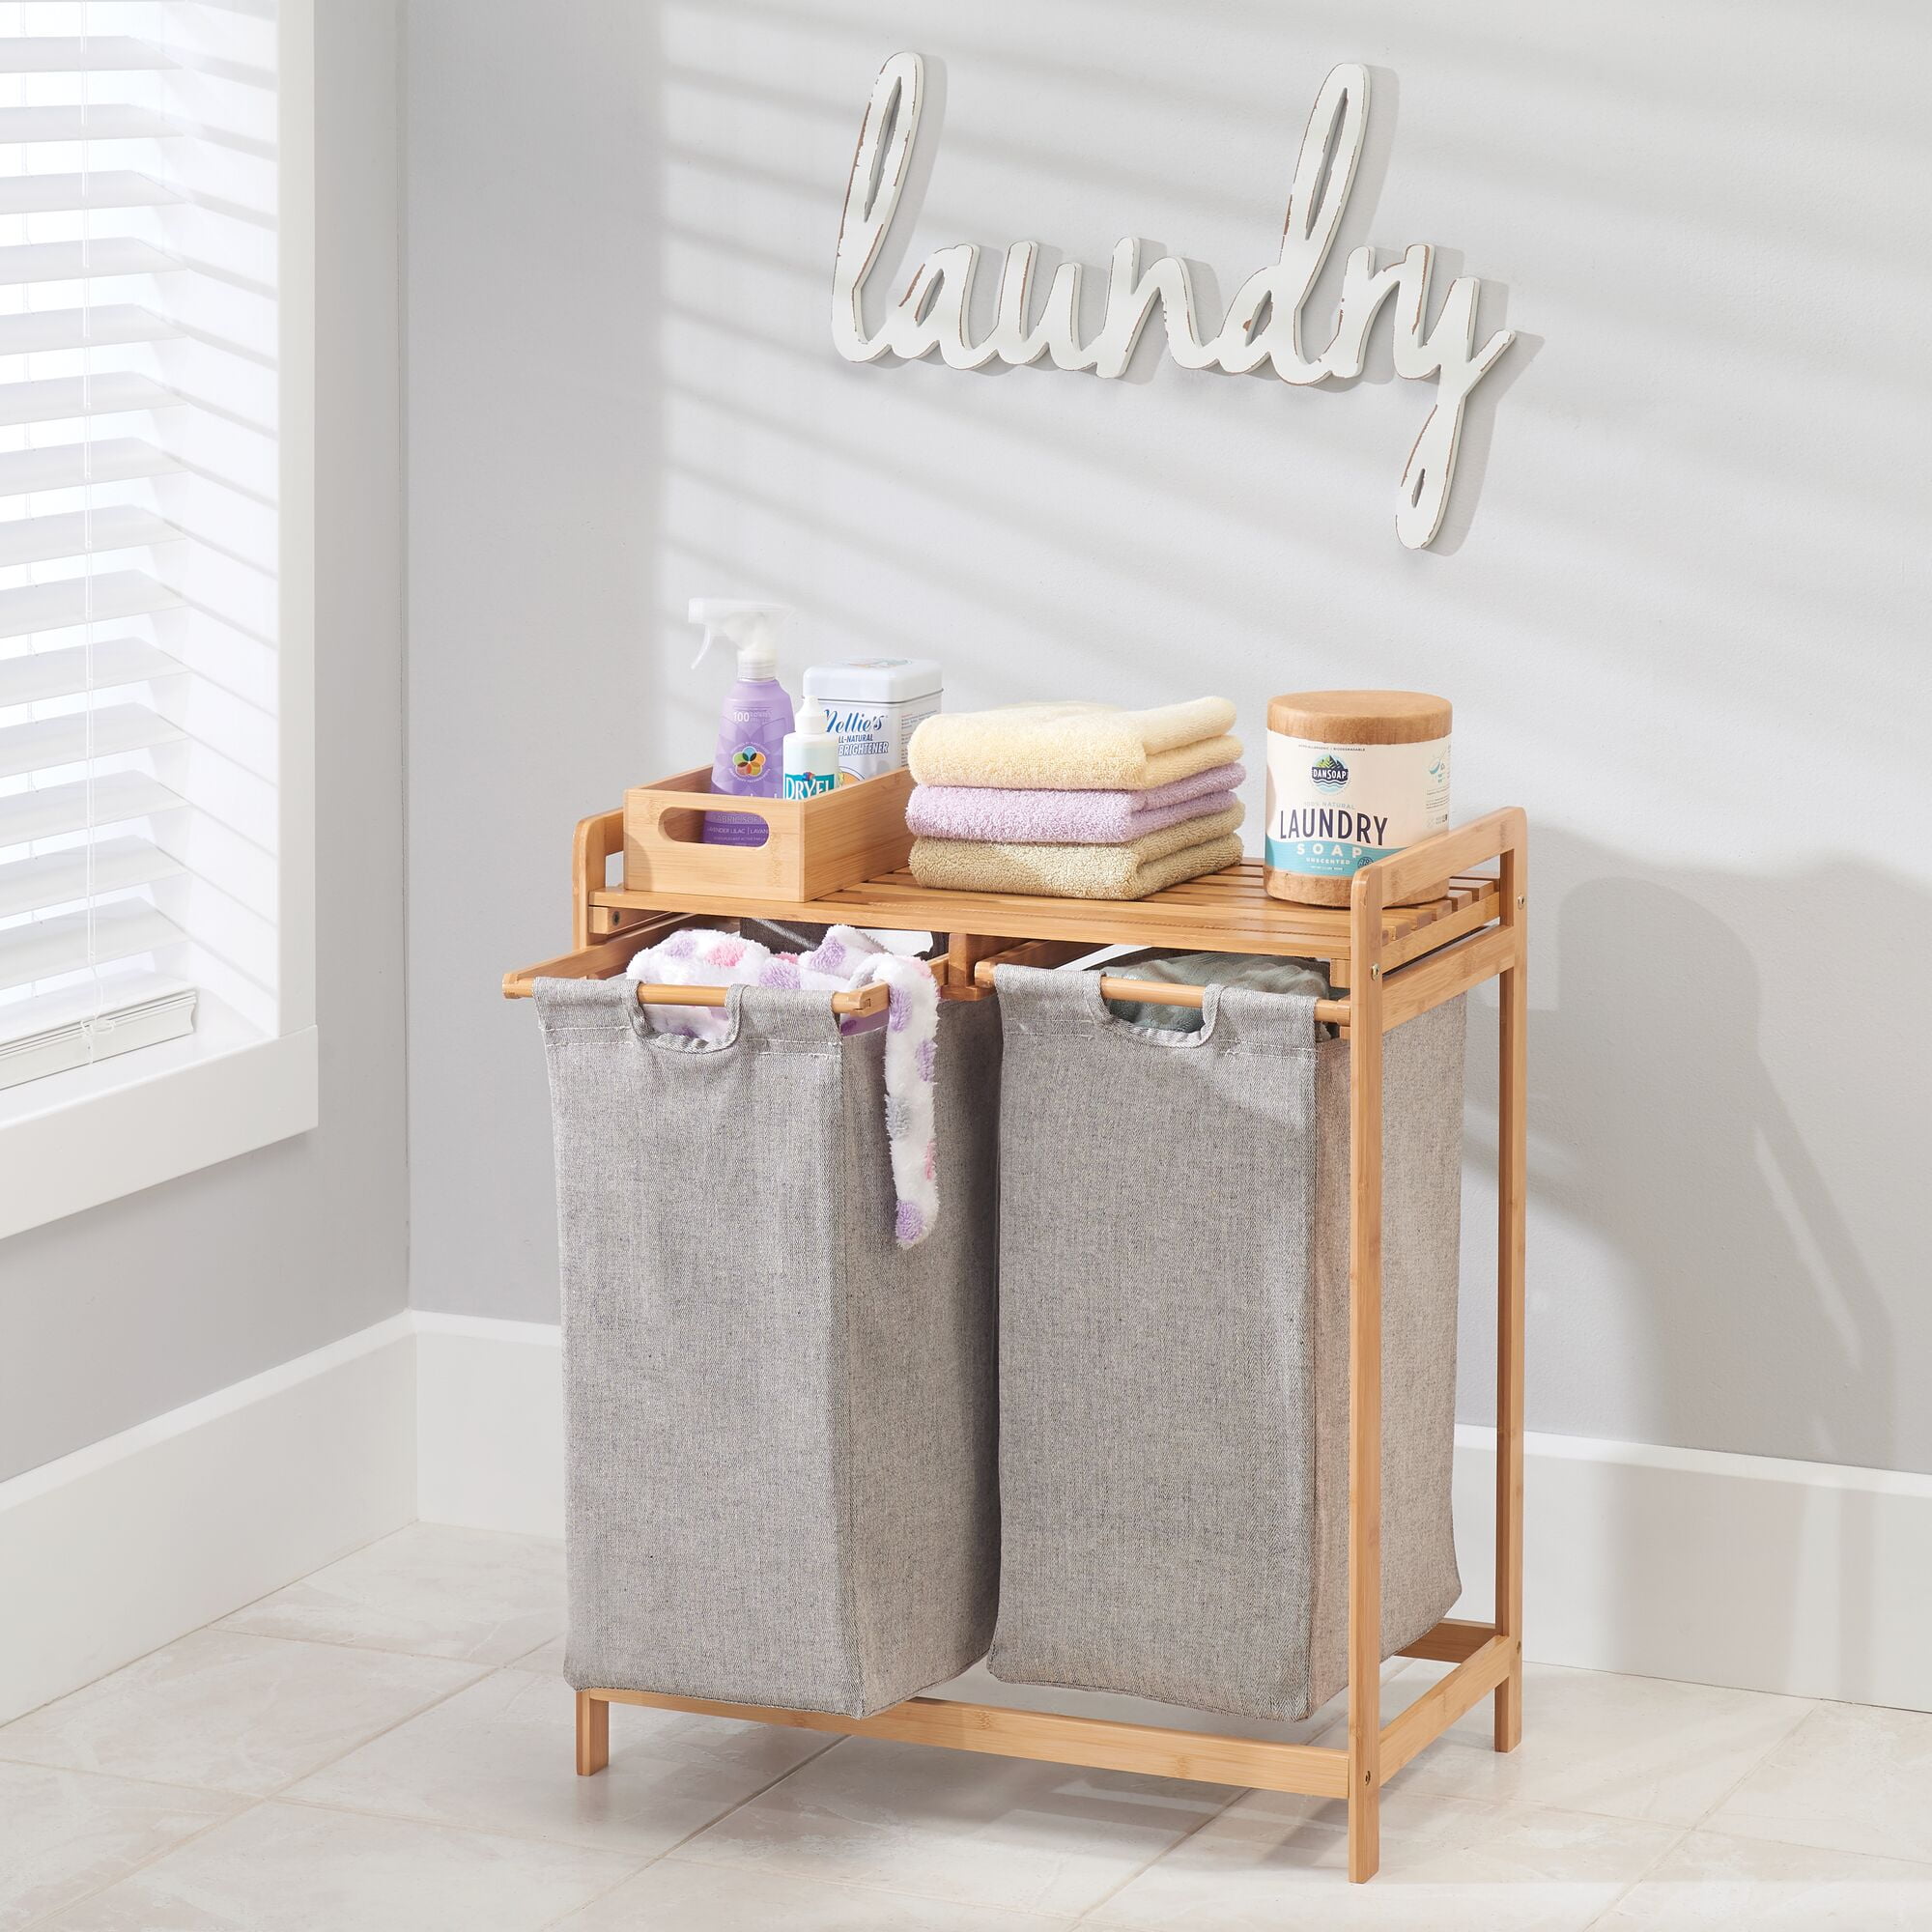 Portable and Foldable for Compact Storage Espresso Bamboo mDesign Bamboo Laundry Hamper Basket with Removable Fabric Liner and Decorative Wood Slats Single Hamper Design 